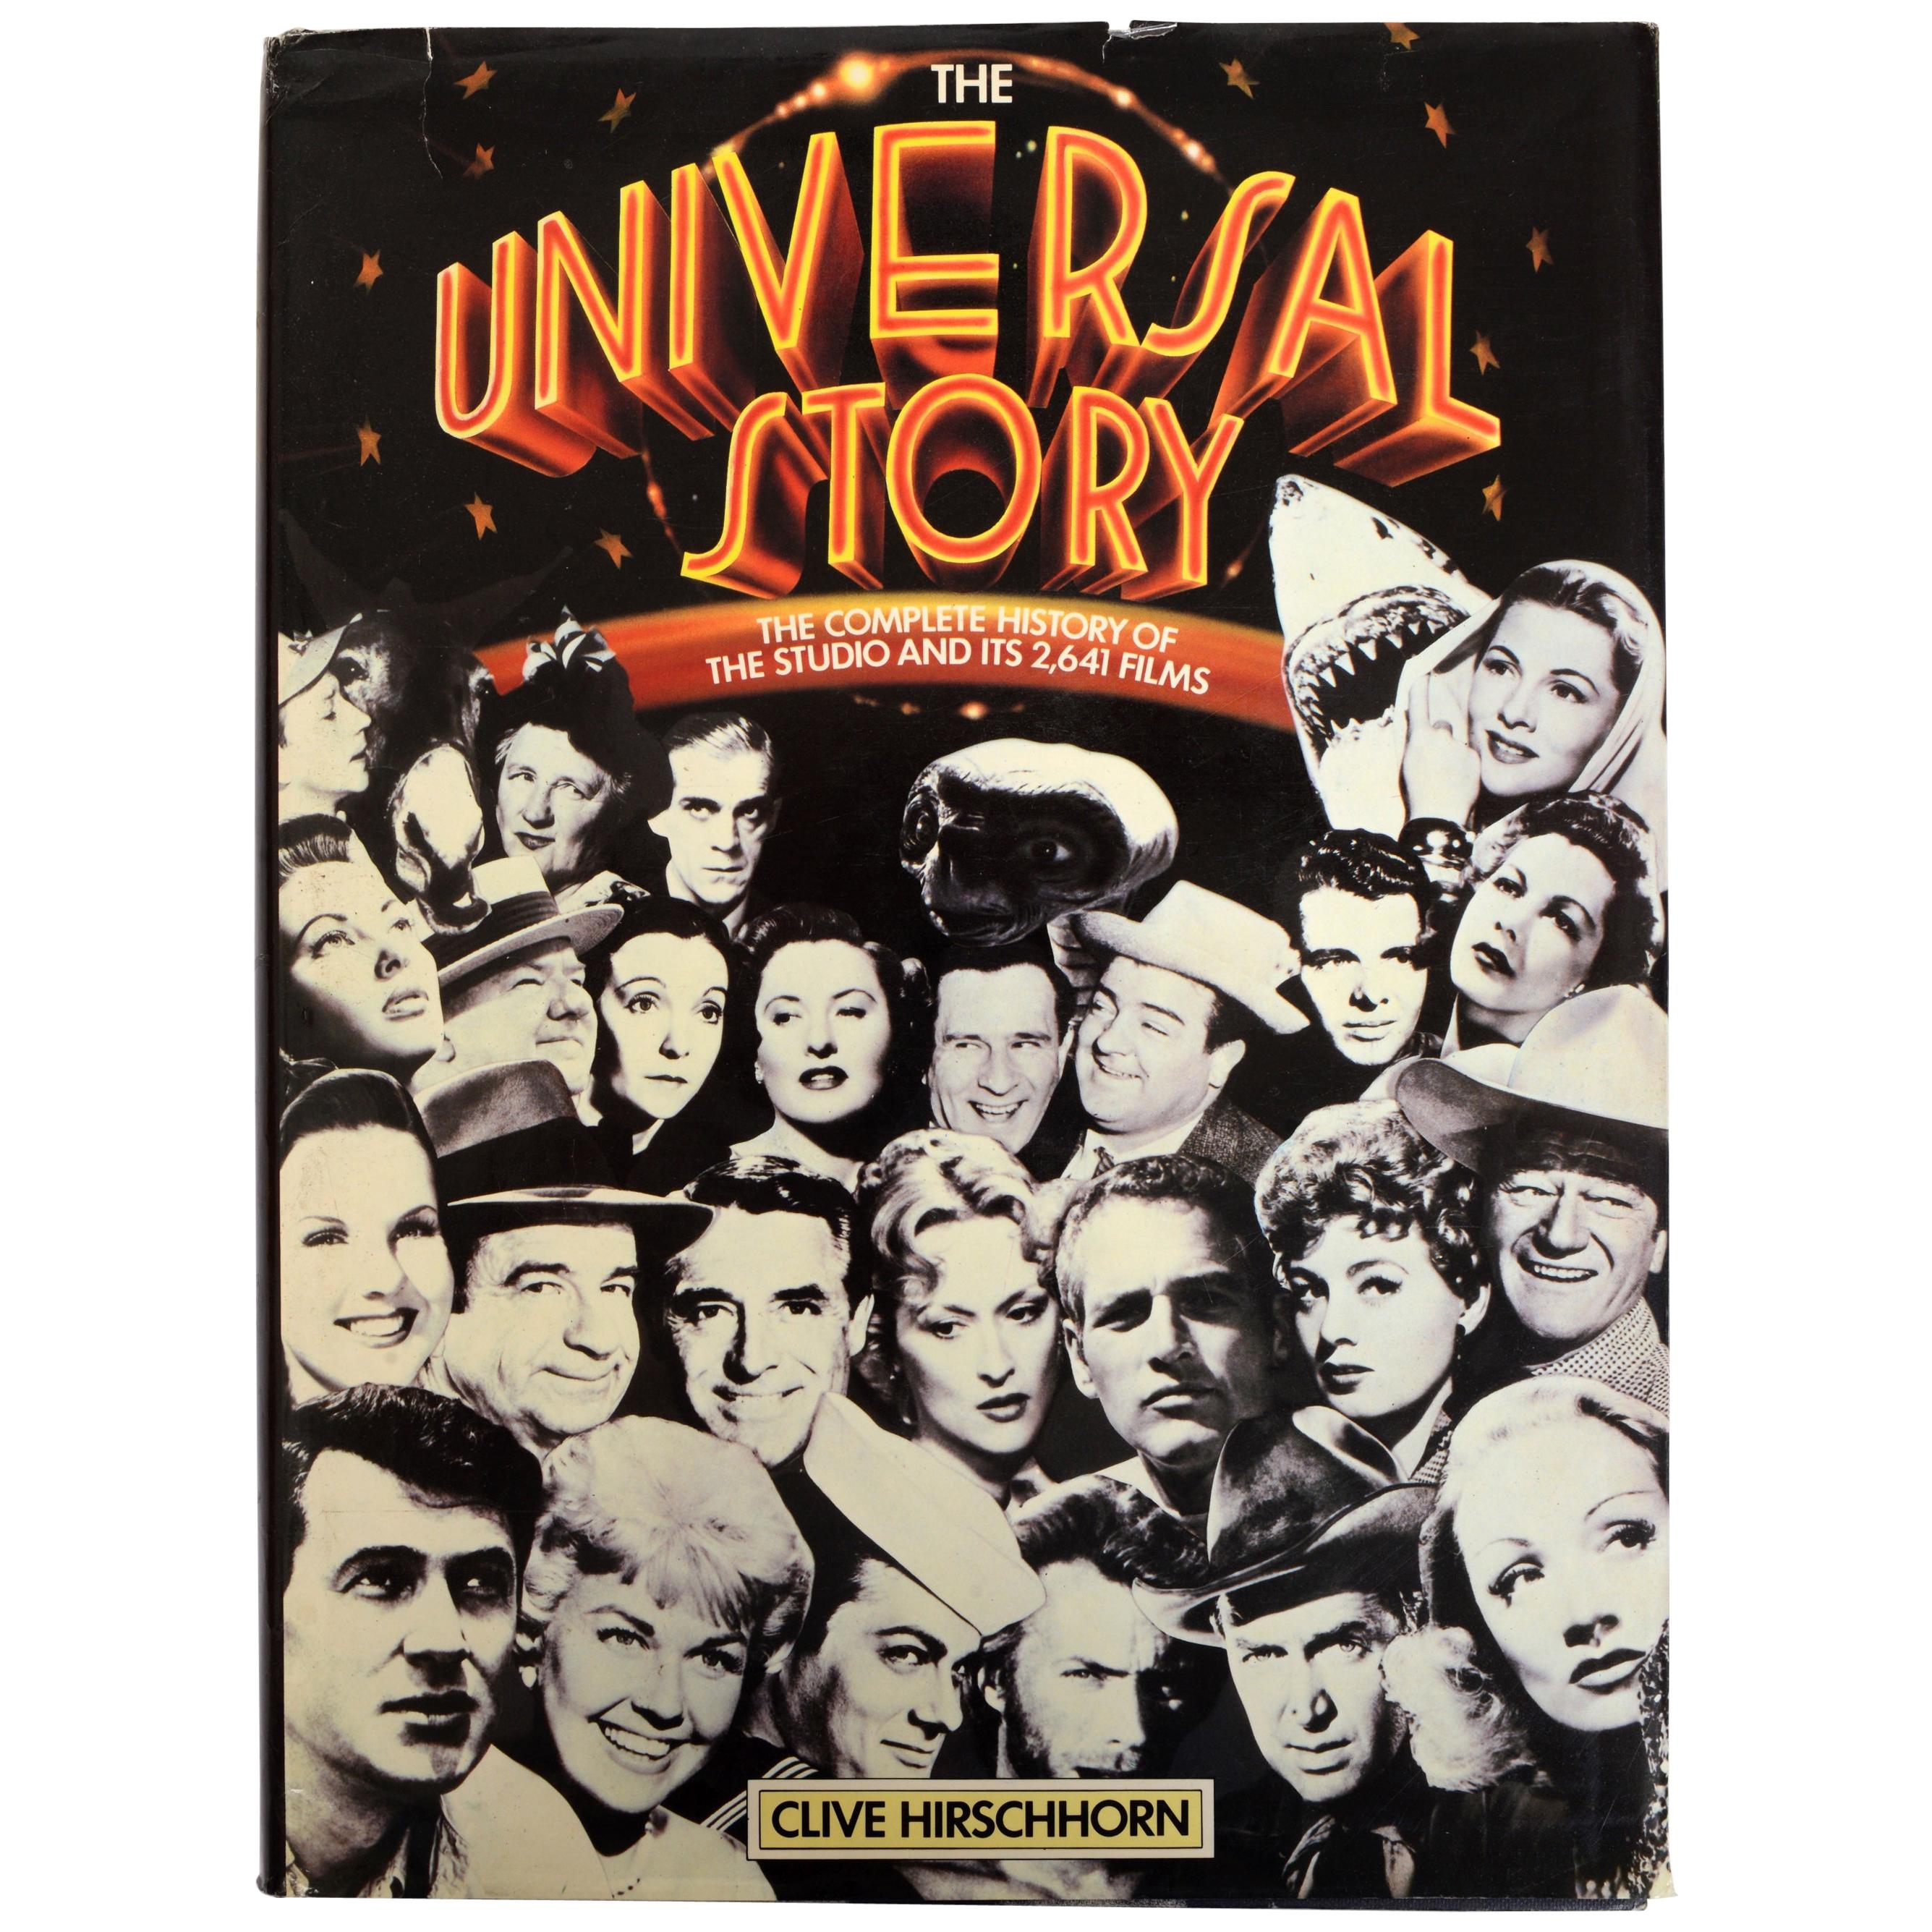 The Universal Story Complete History of the Studio & Its 2,641 Films, 1st Ed